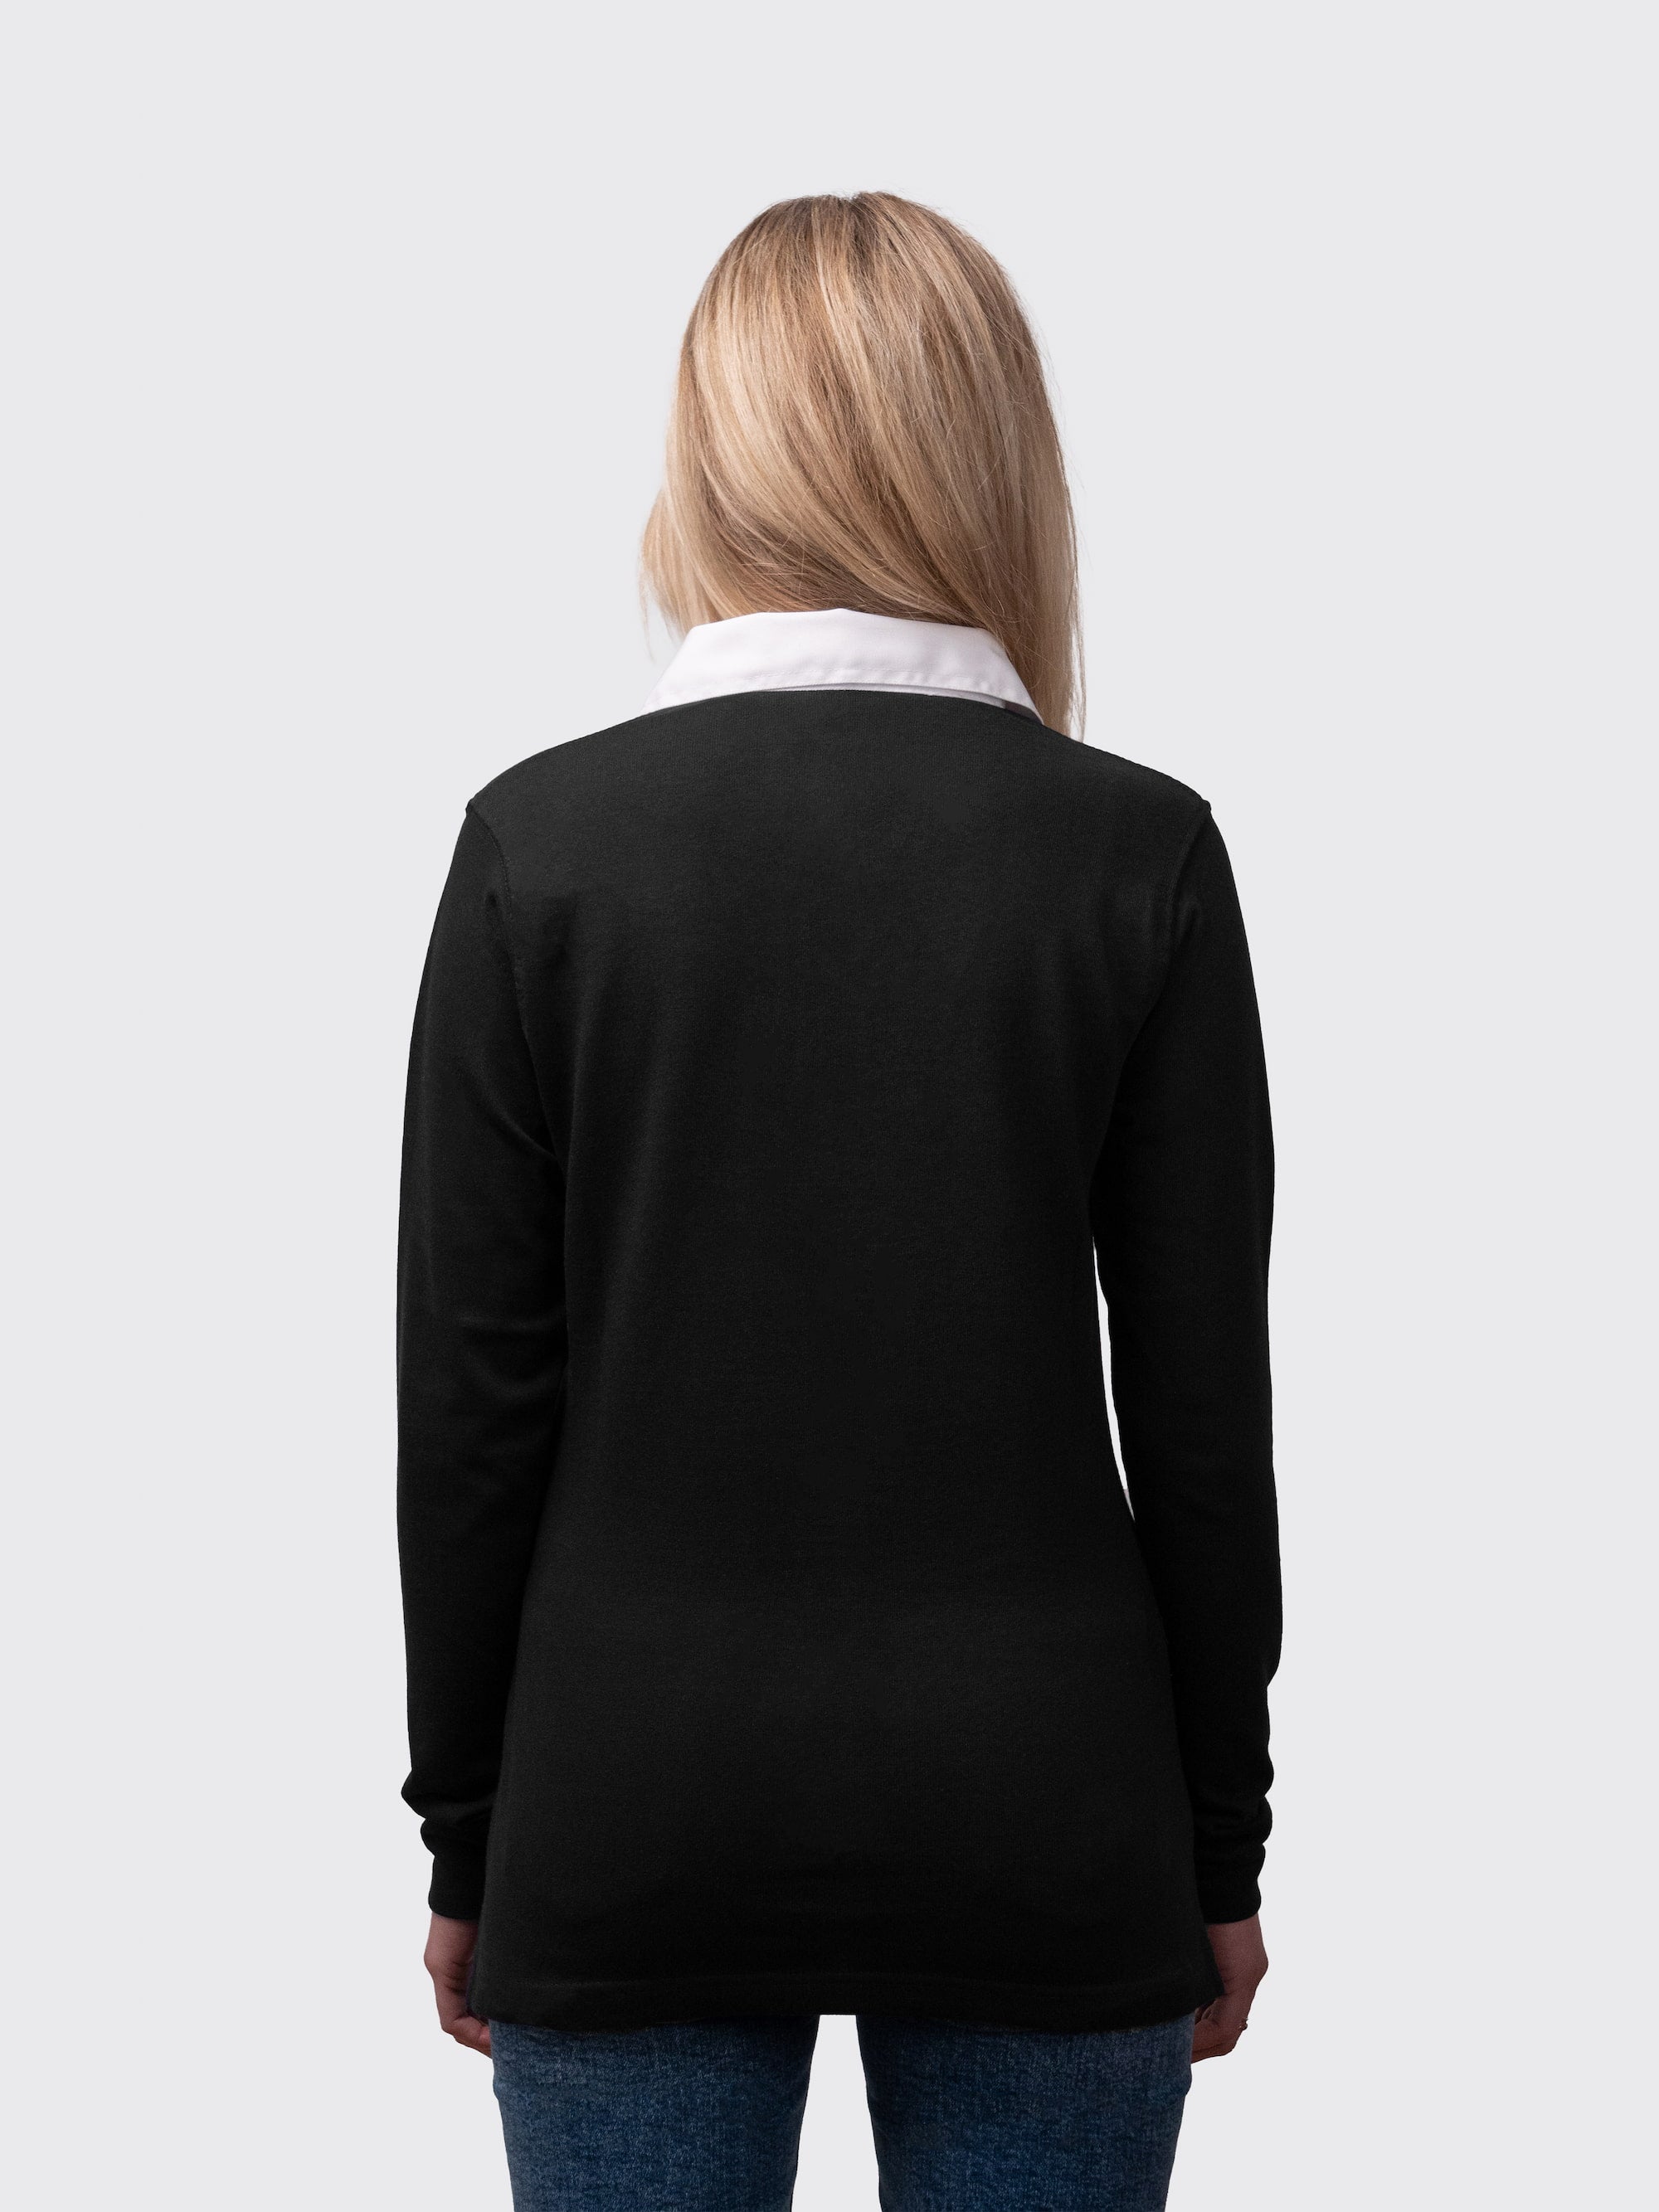 Cambridge University ladies rugby shirt in black, with white contrast collar 